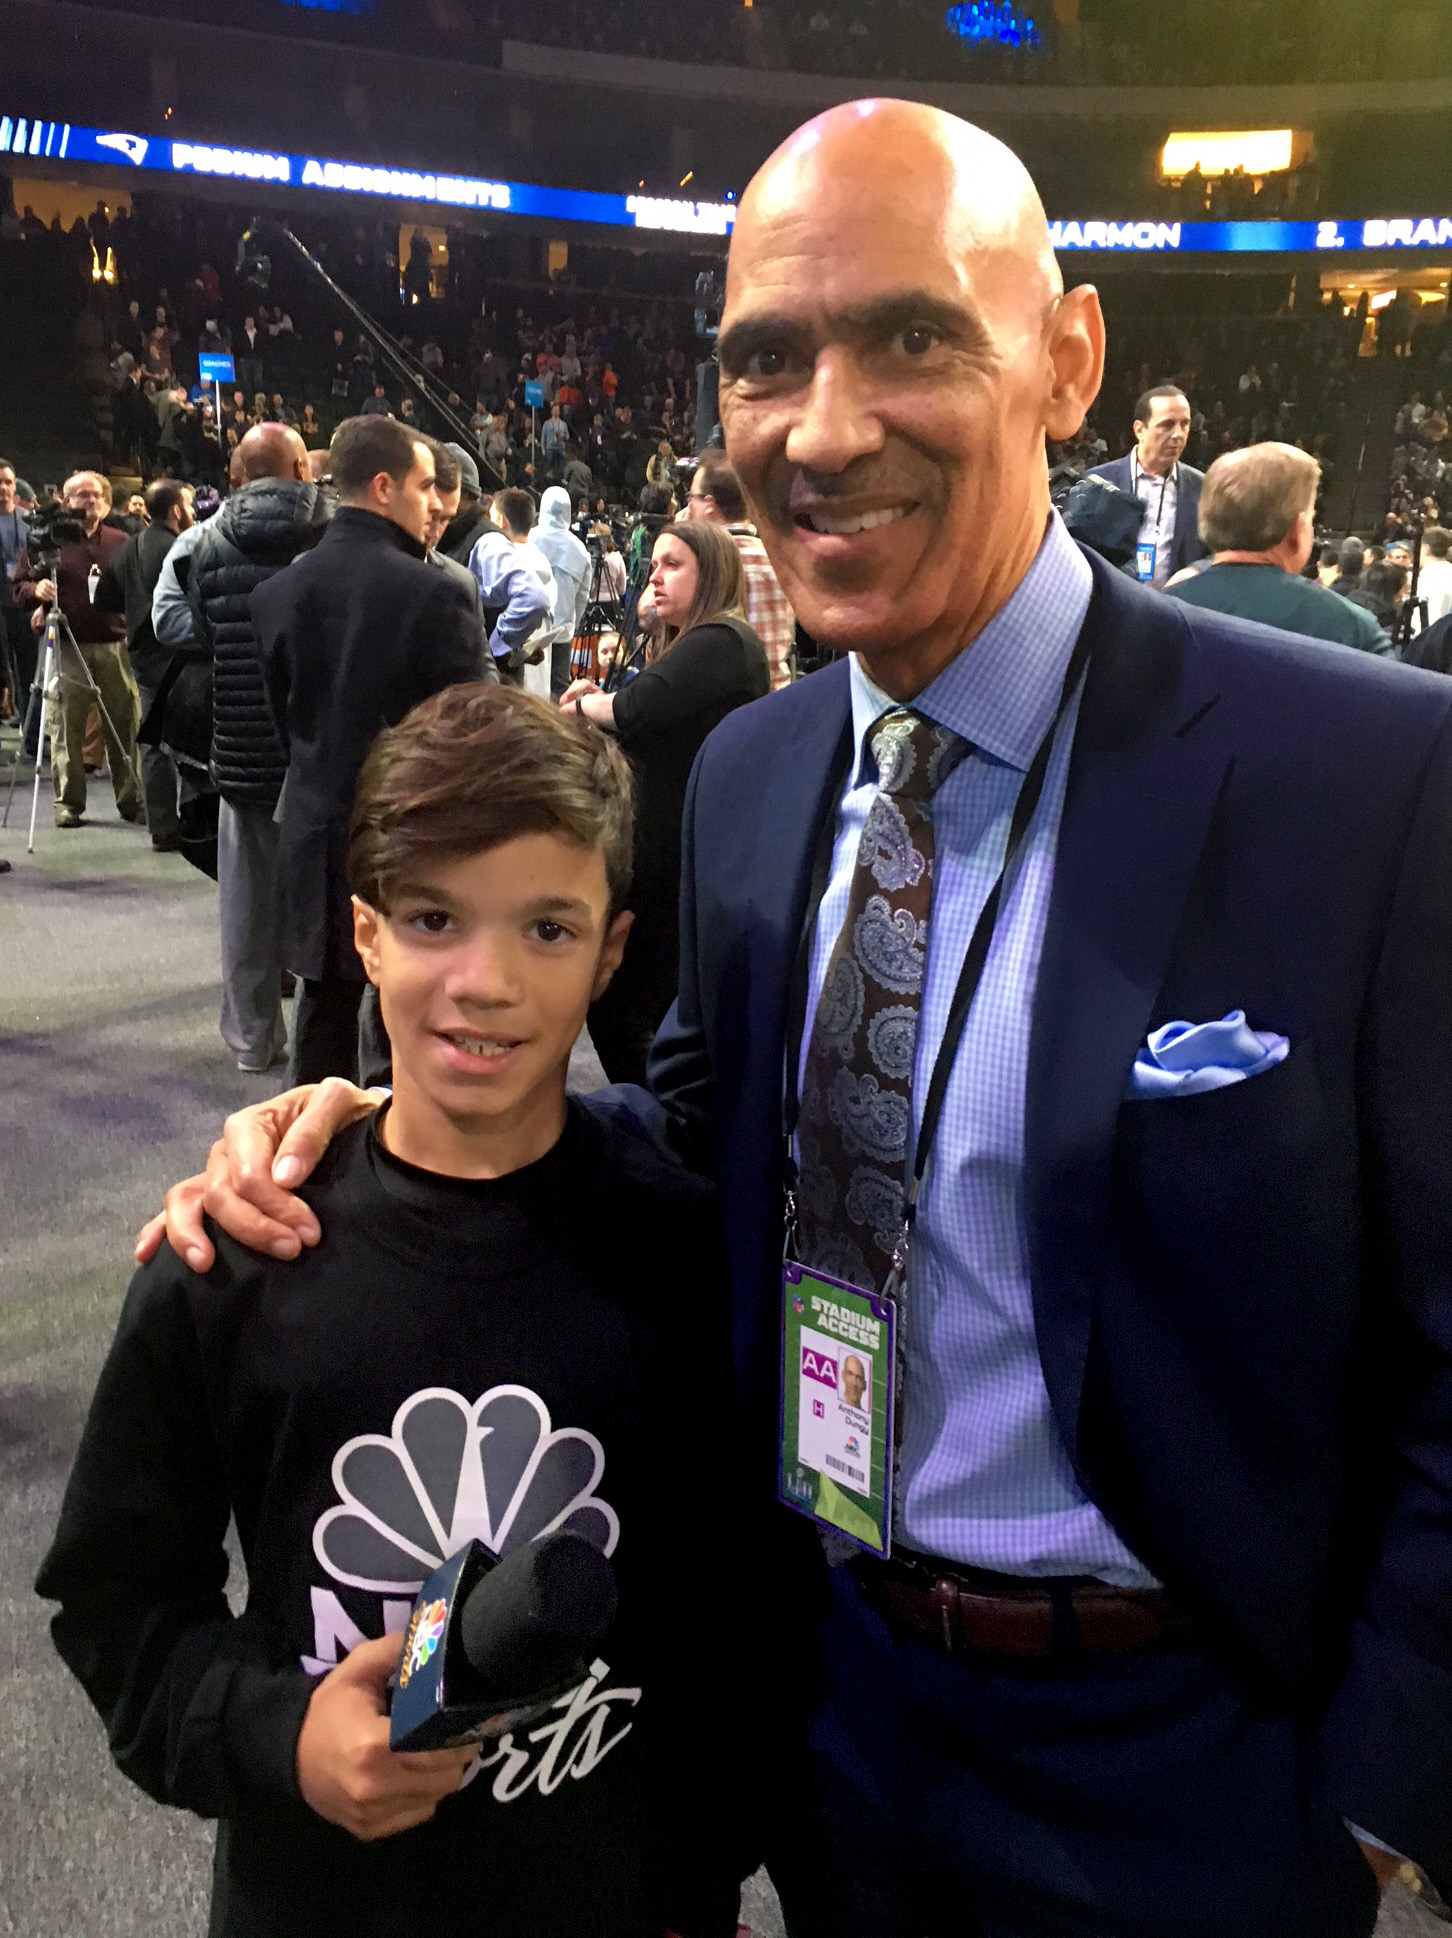 Tony Dungy's son Justin scoring Super Bowl LII interviews as kid reporter